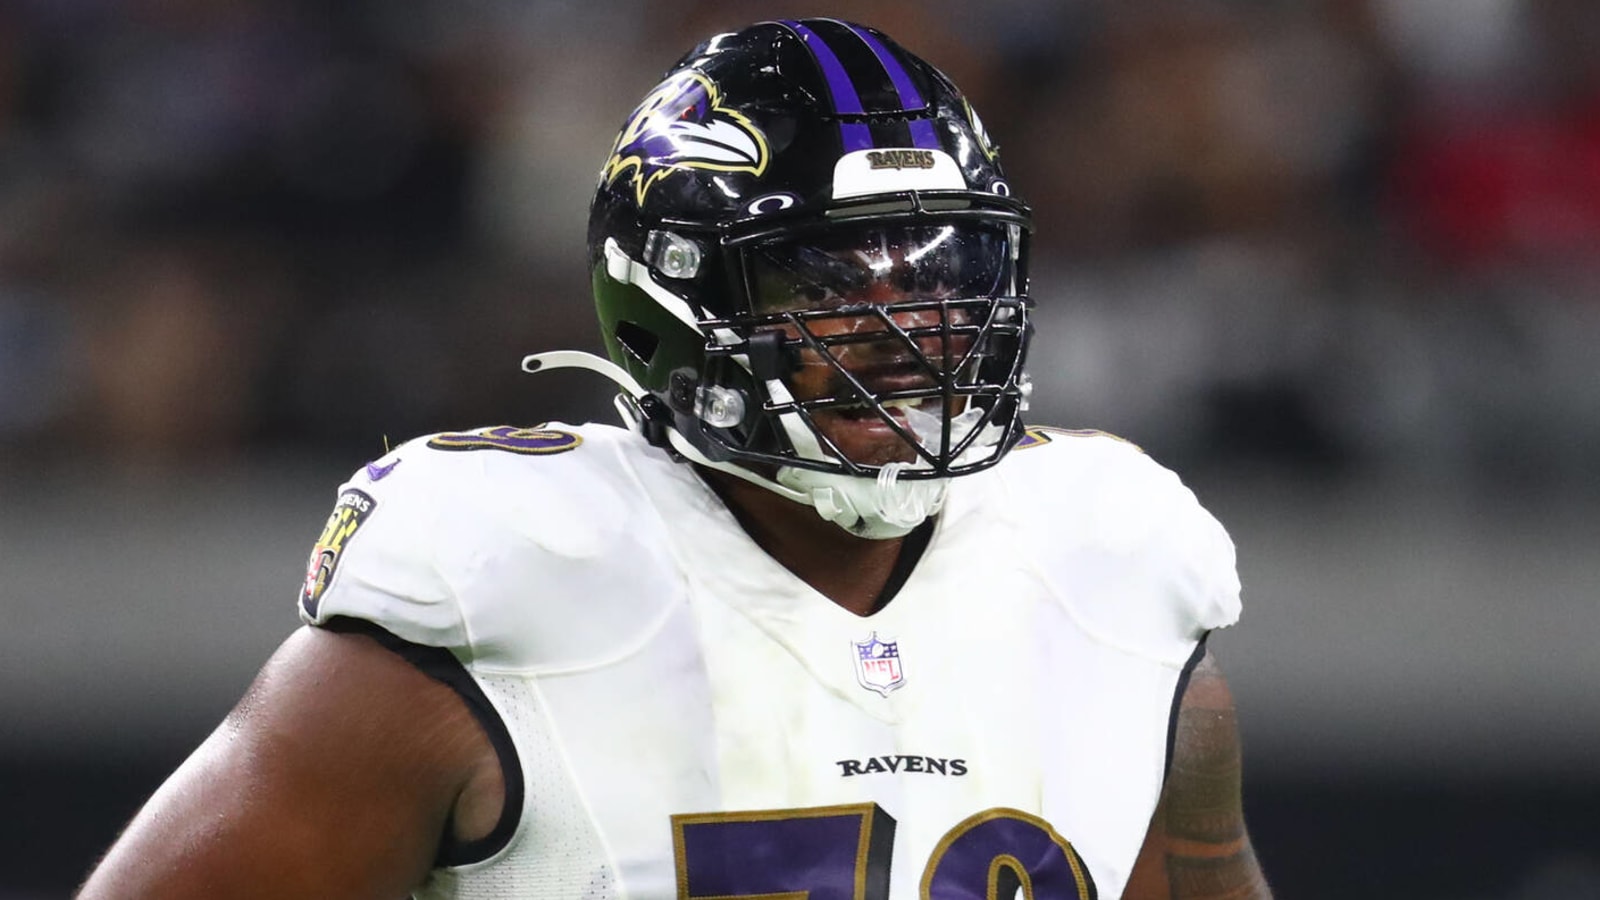 Ronnie Stanley expected to be ready by Week 1